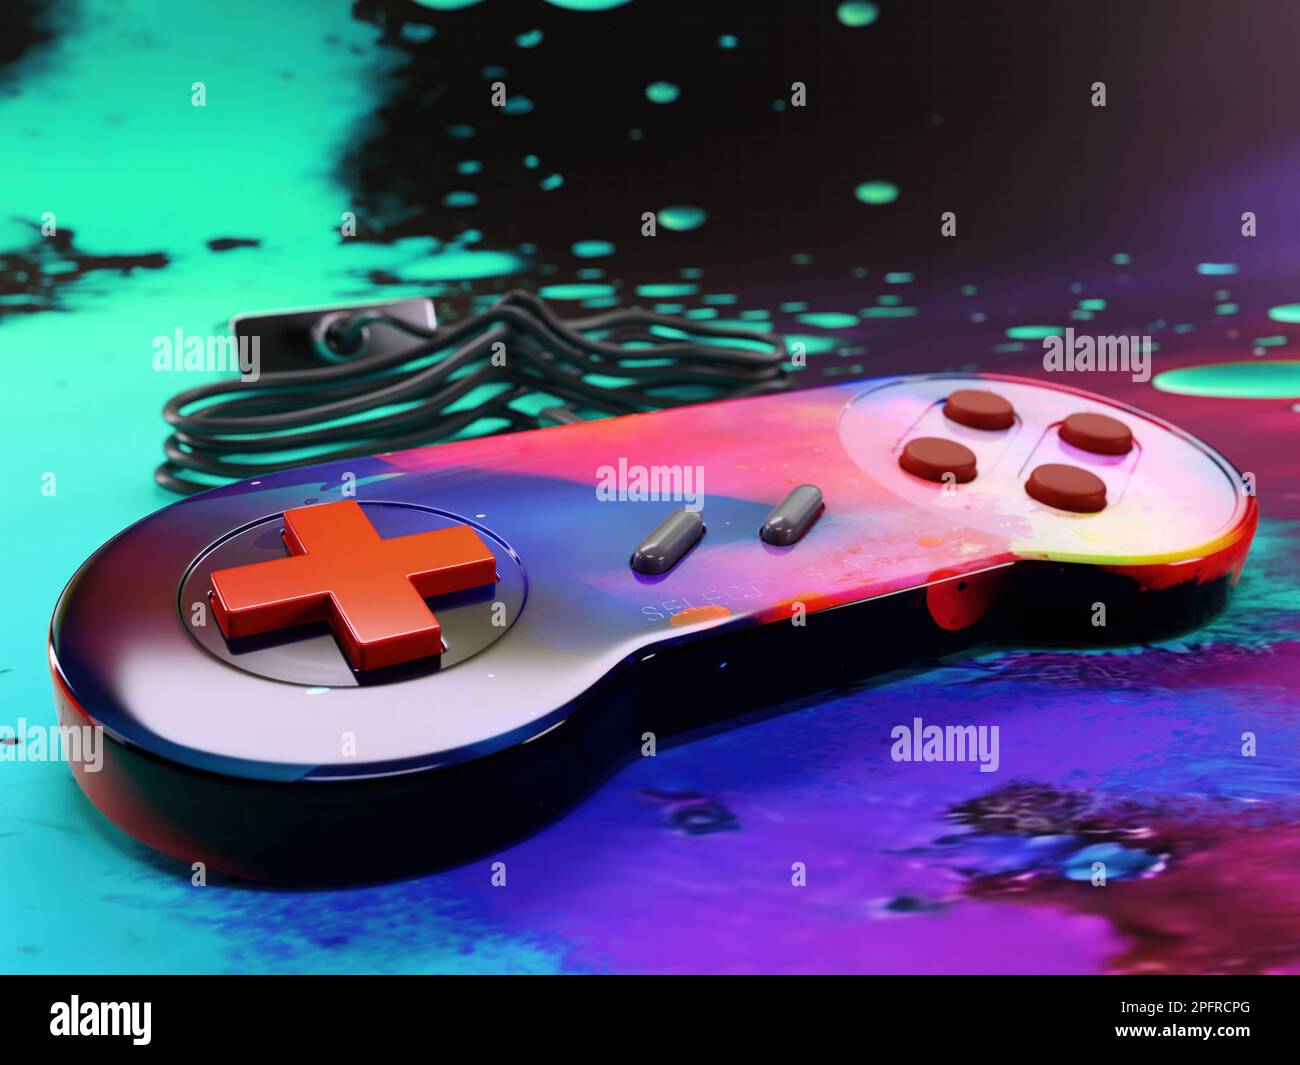 3d rendering of game controller in abstract splashy colors Stock Photo